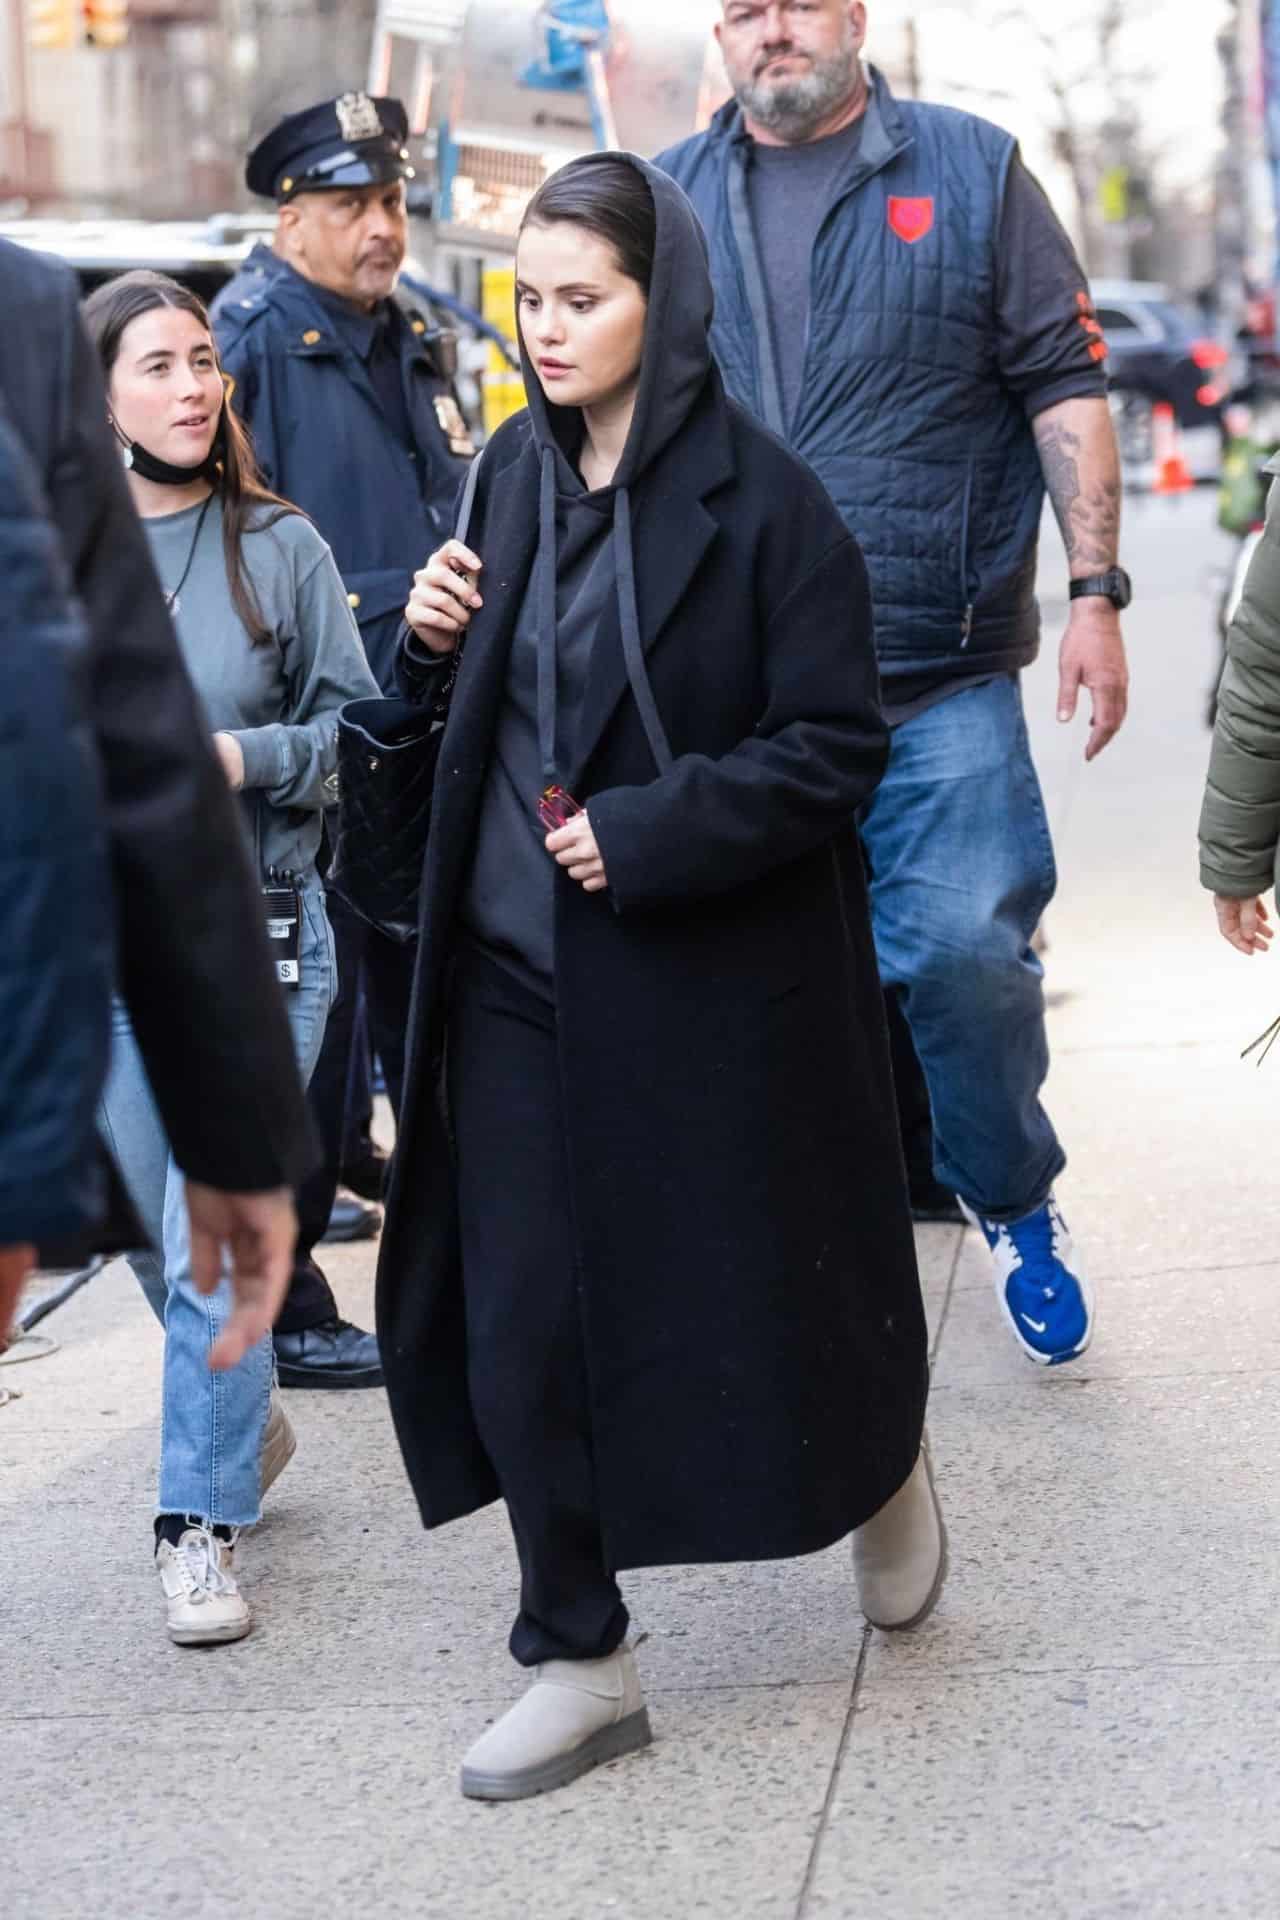 Selena Gomez Amazes in Cozy Winter Outfit on OMITB Set